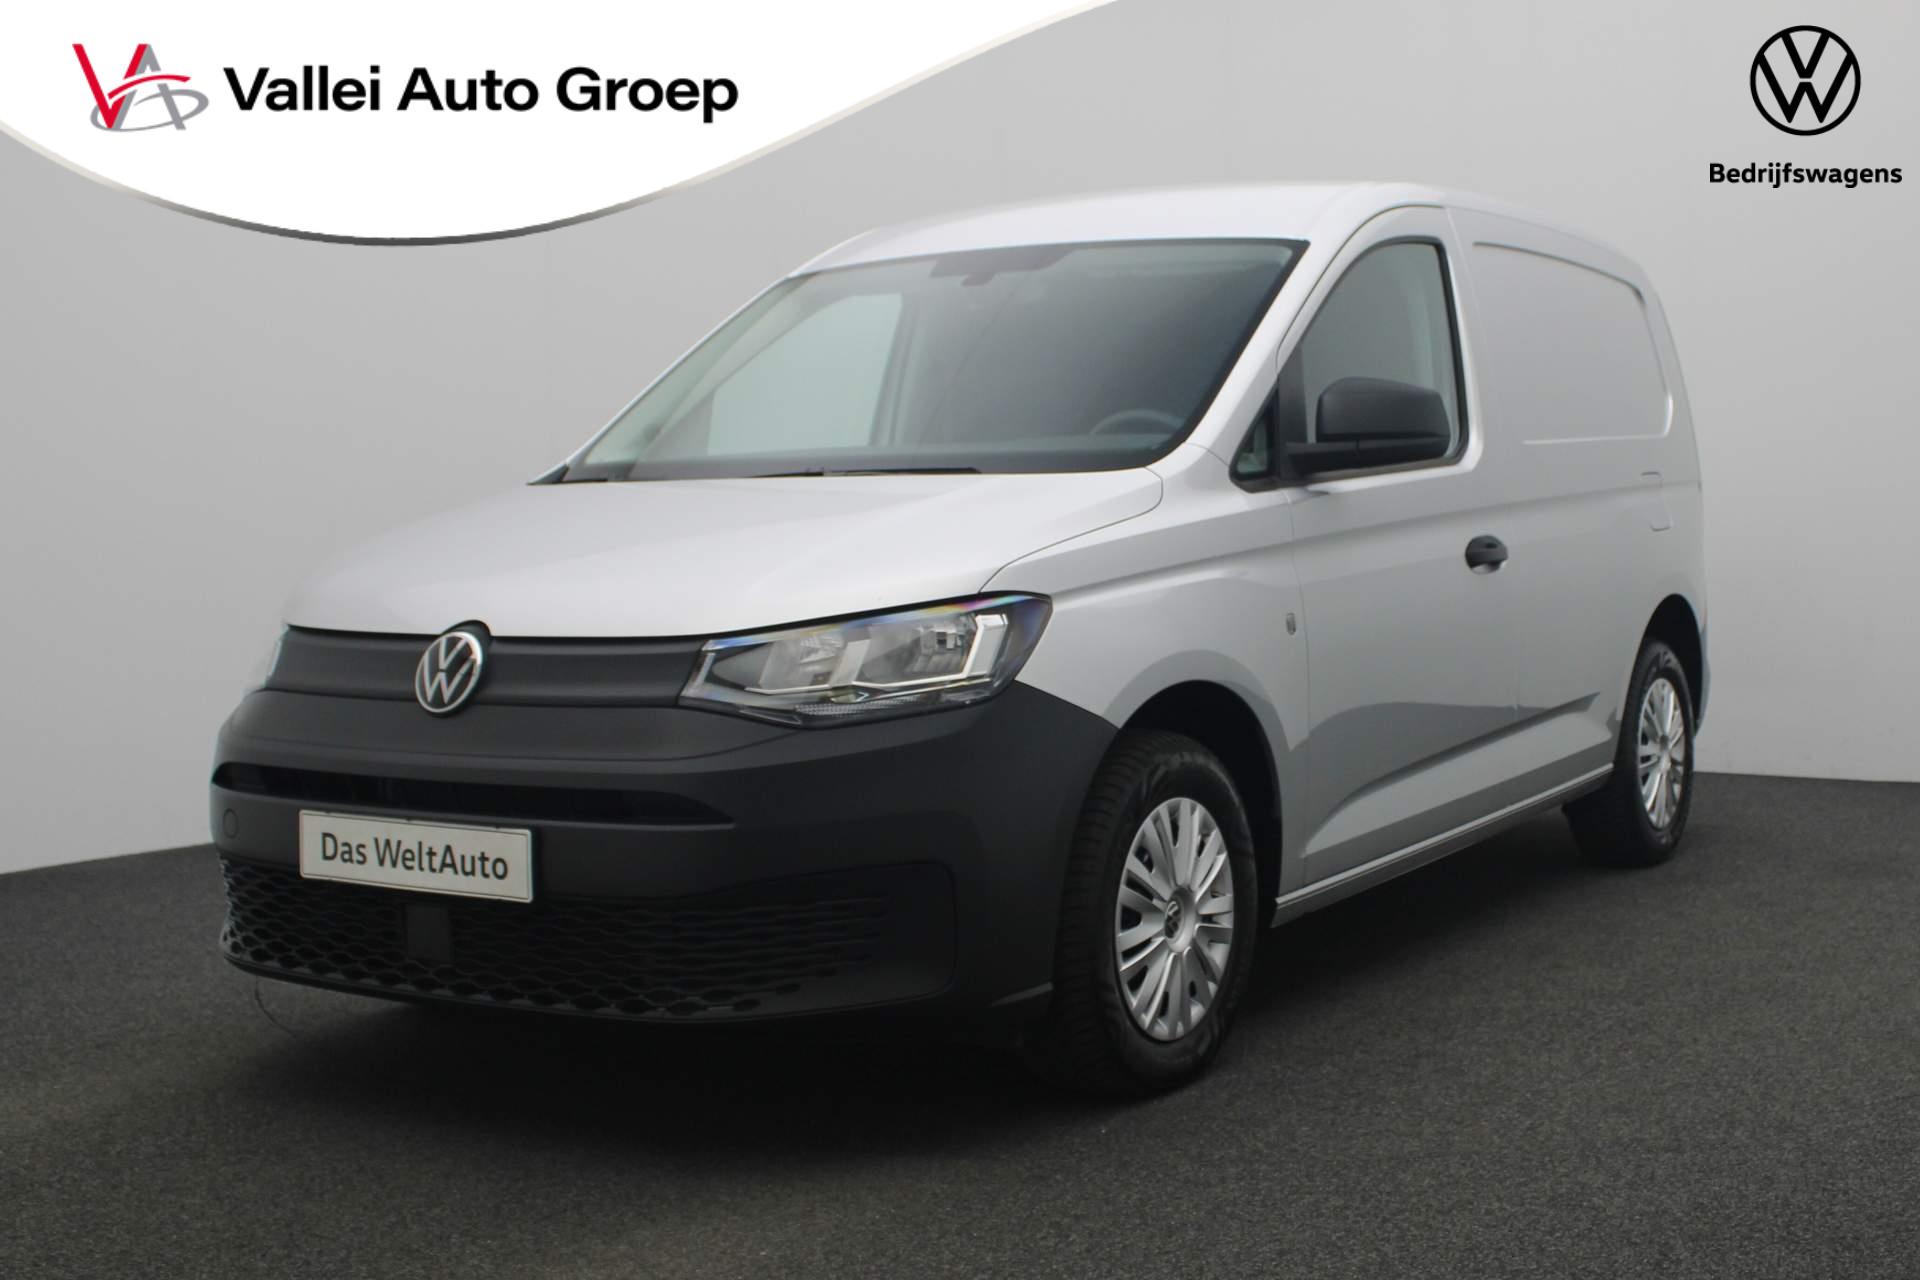 Volkswagen Caddy Cargo 2.0 TDI 75PK Comfort | Airco | Cruise | Lat om lat | PDC achter | Apple Carplay / Android Auto